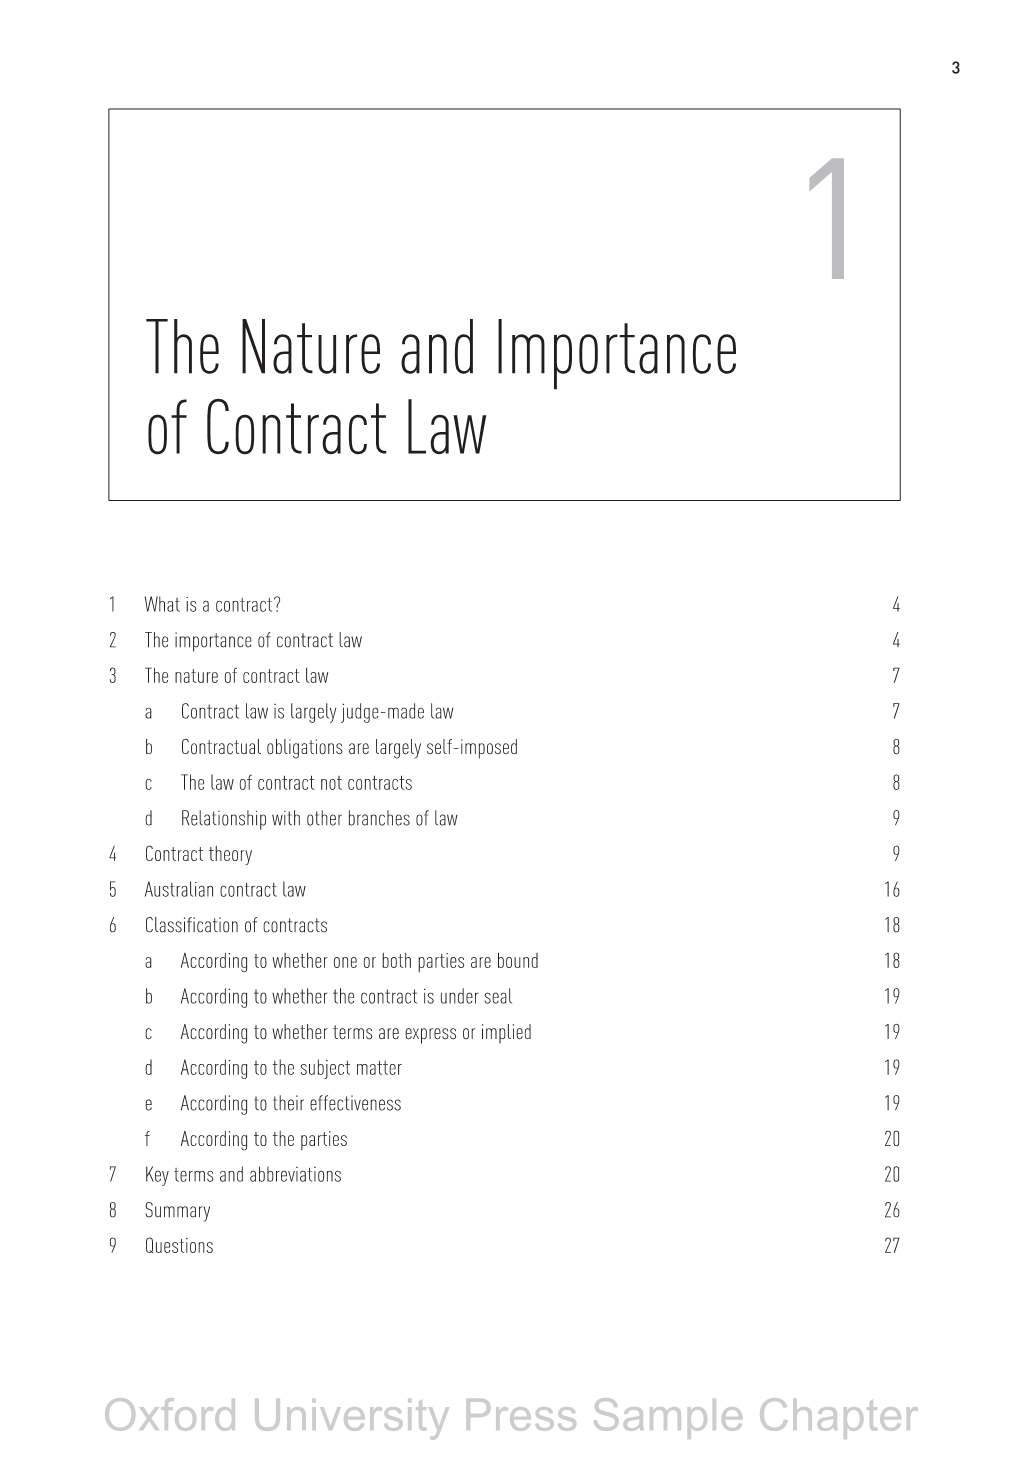 The Nature and Importance of Contract Law